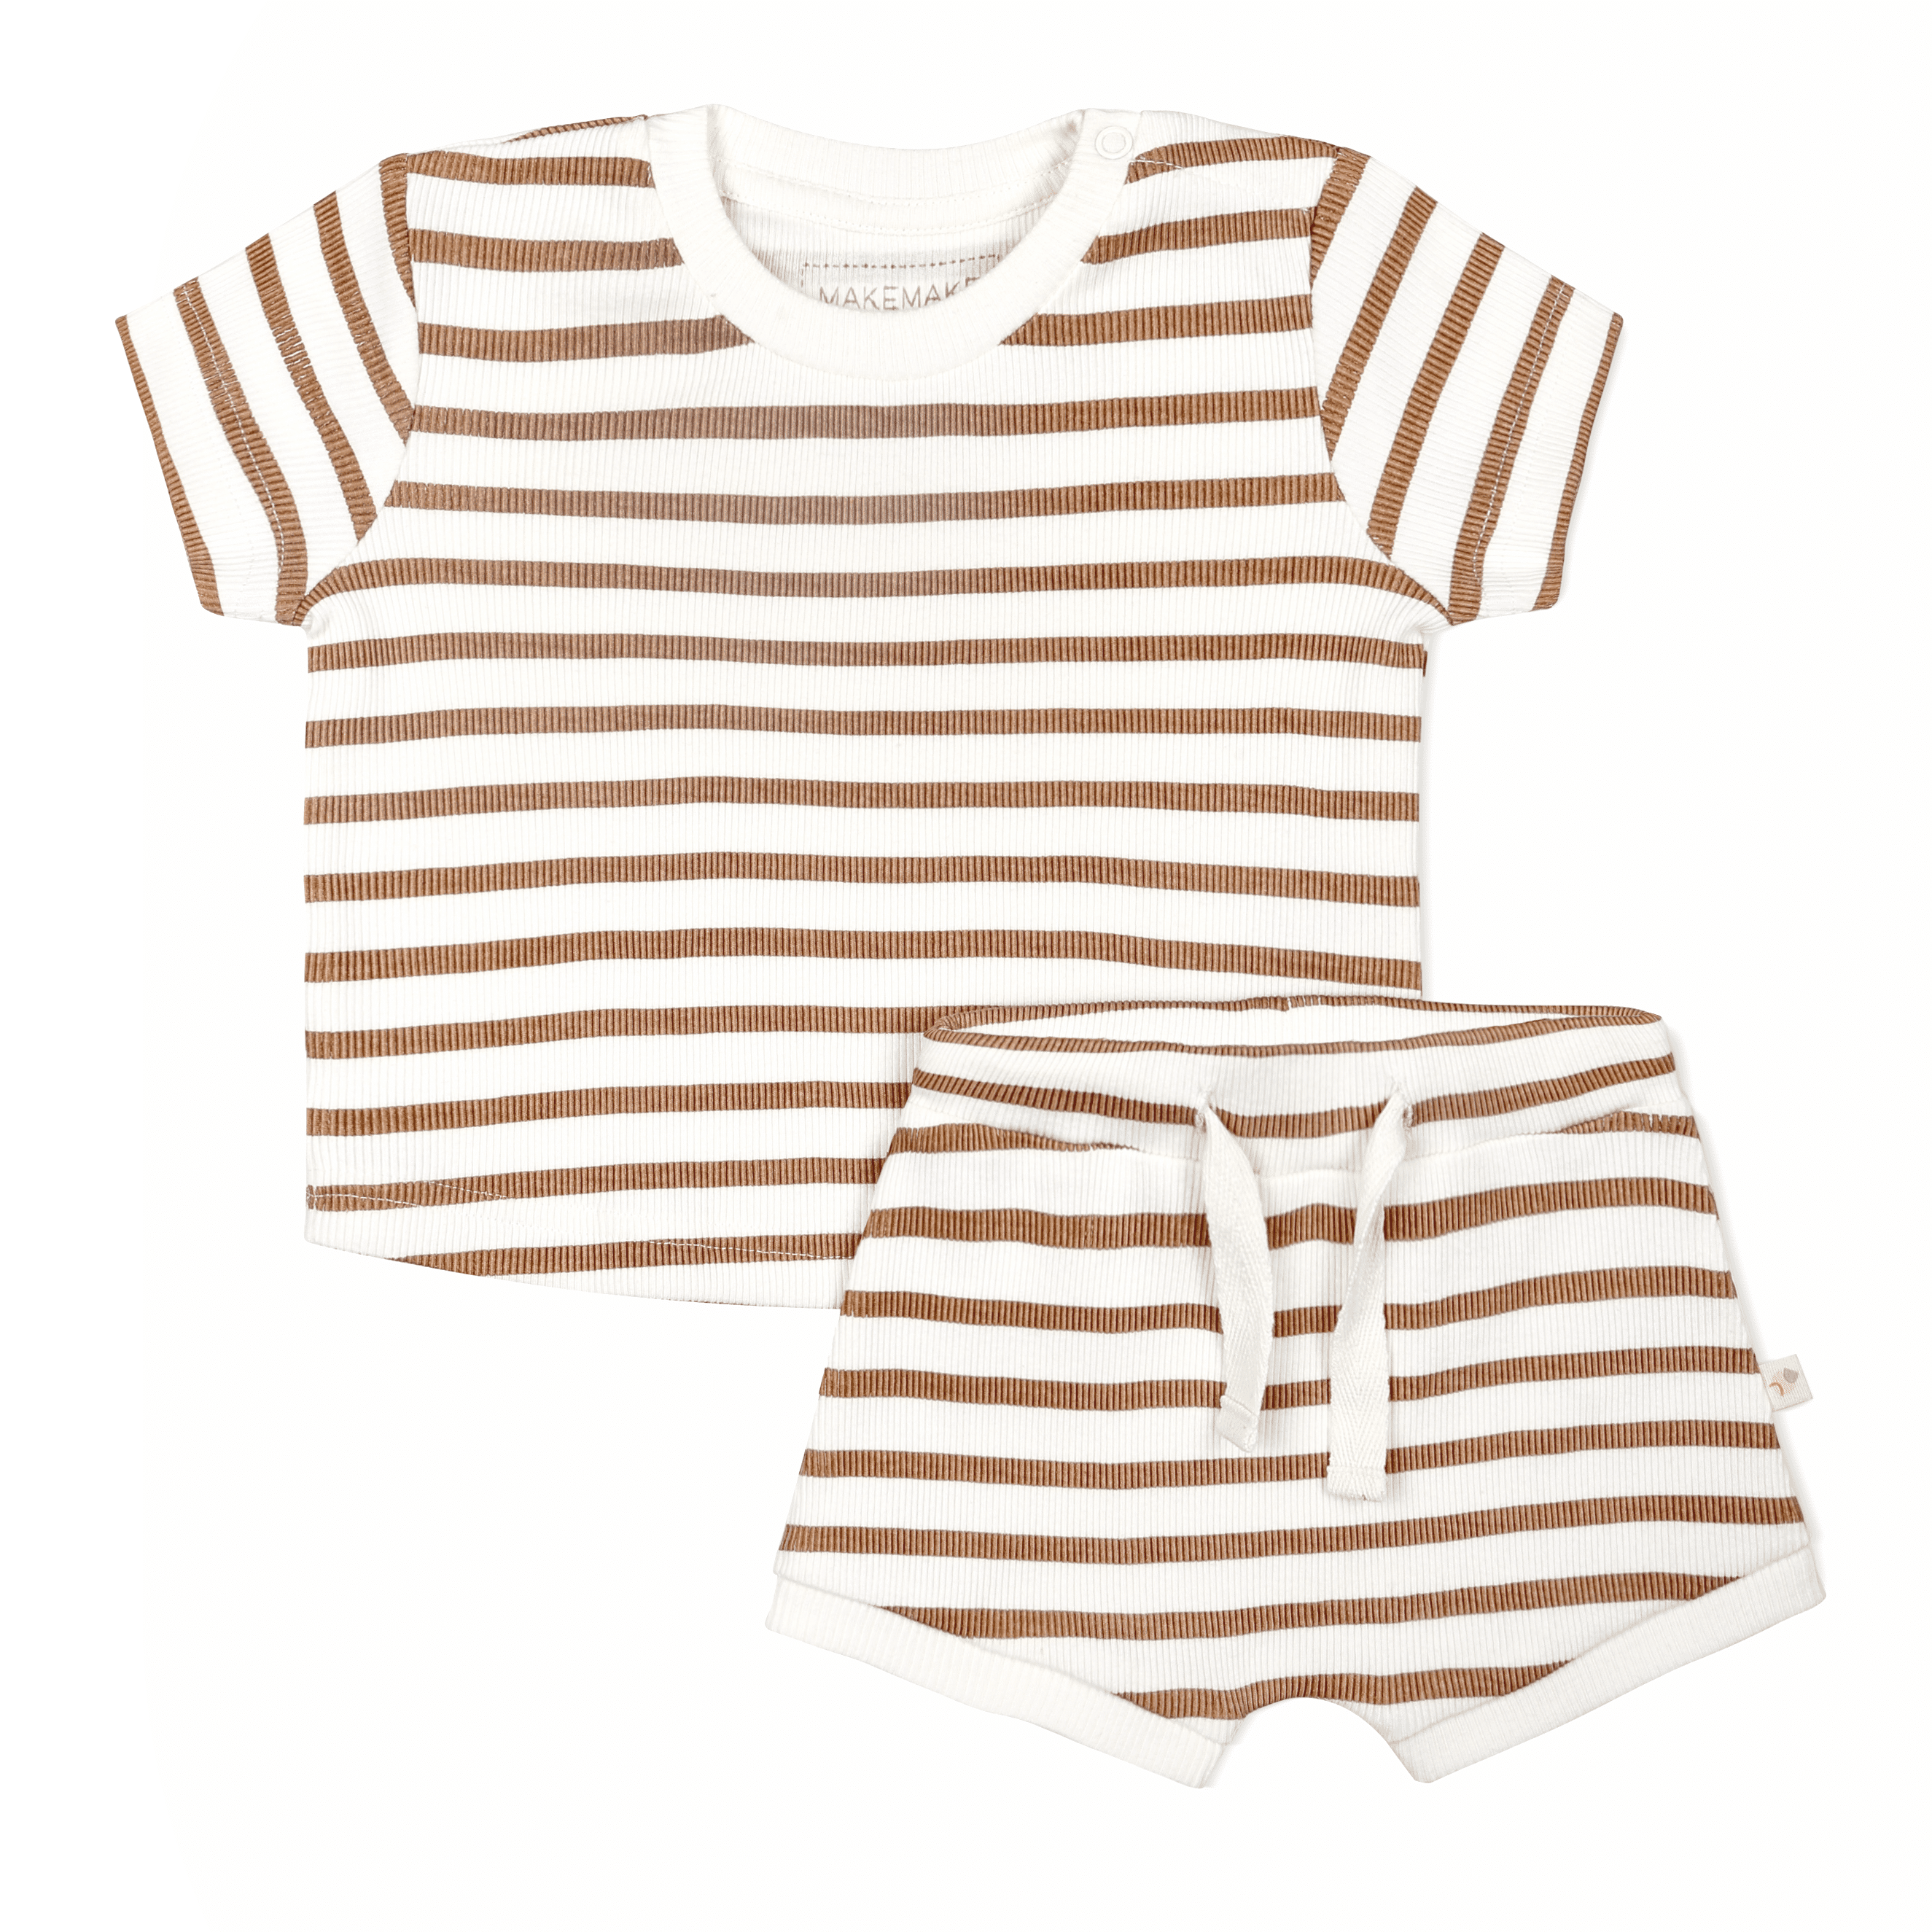 Brown and white striped organic tee and shorties set by Makemake Organics on a white background.